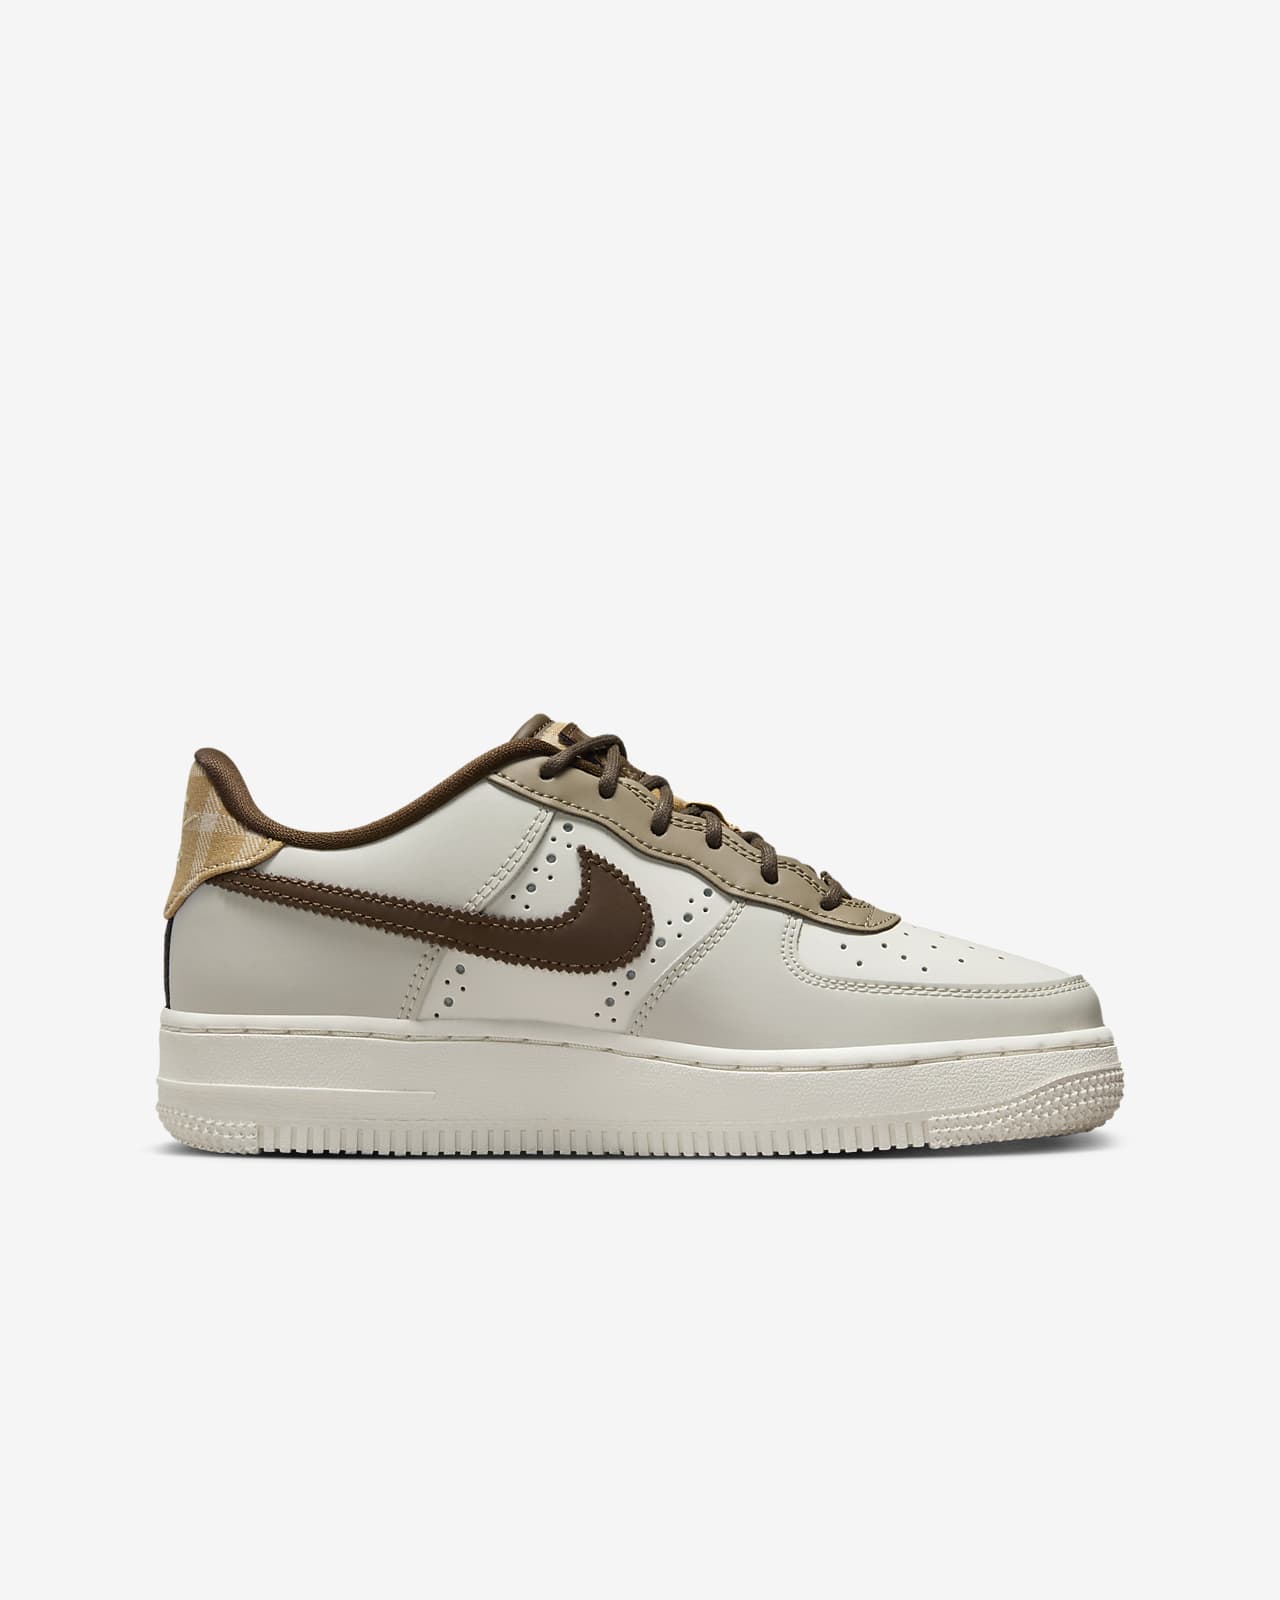 Nike Air Force 1 LV8 Older Kids' Shoes Size 4Y (White)